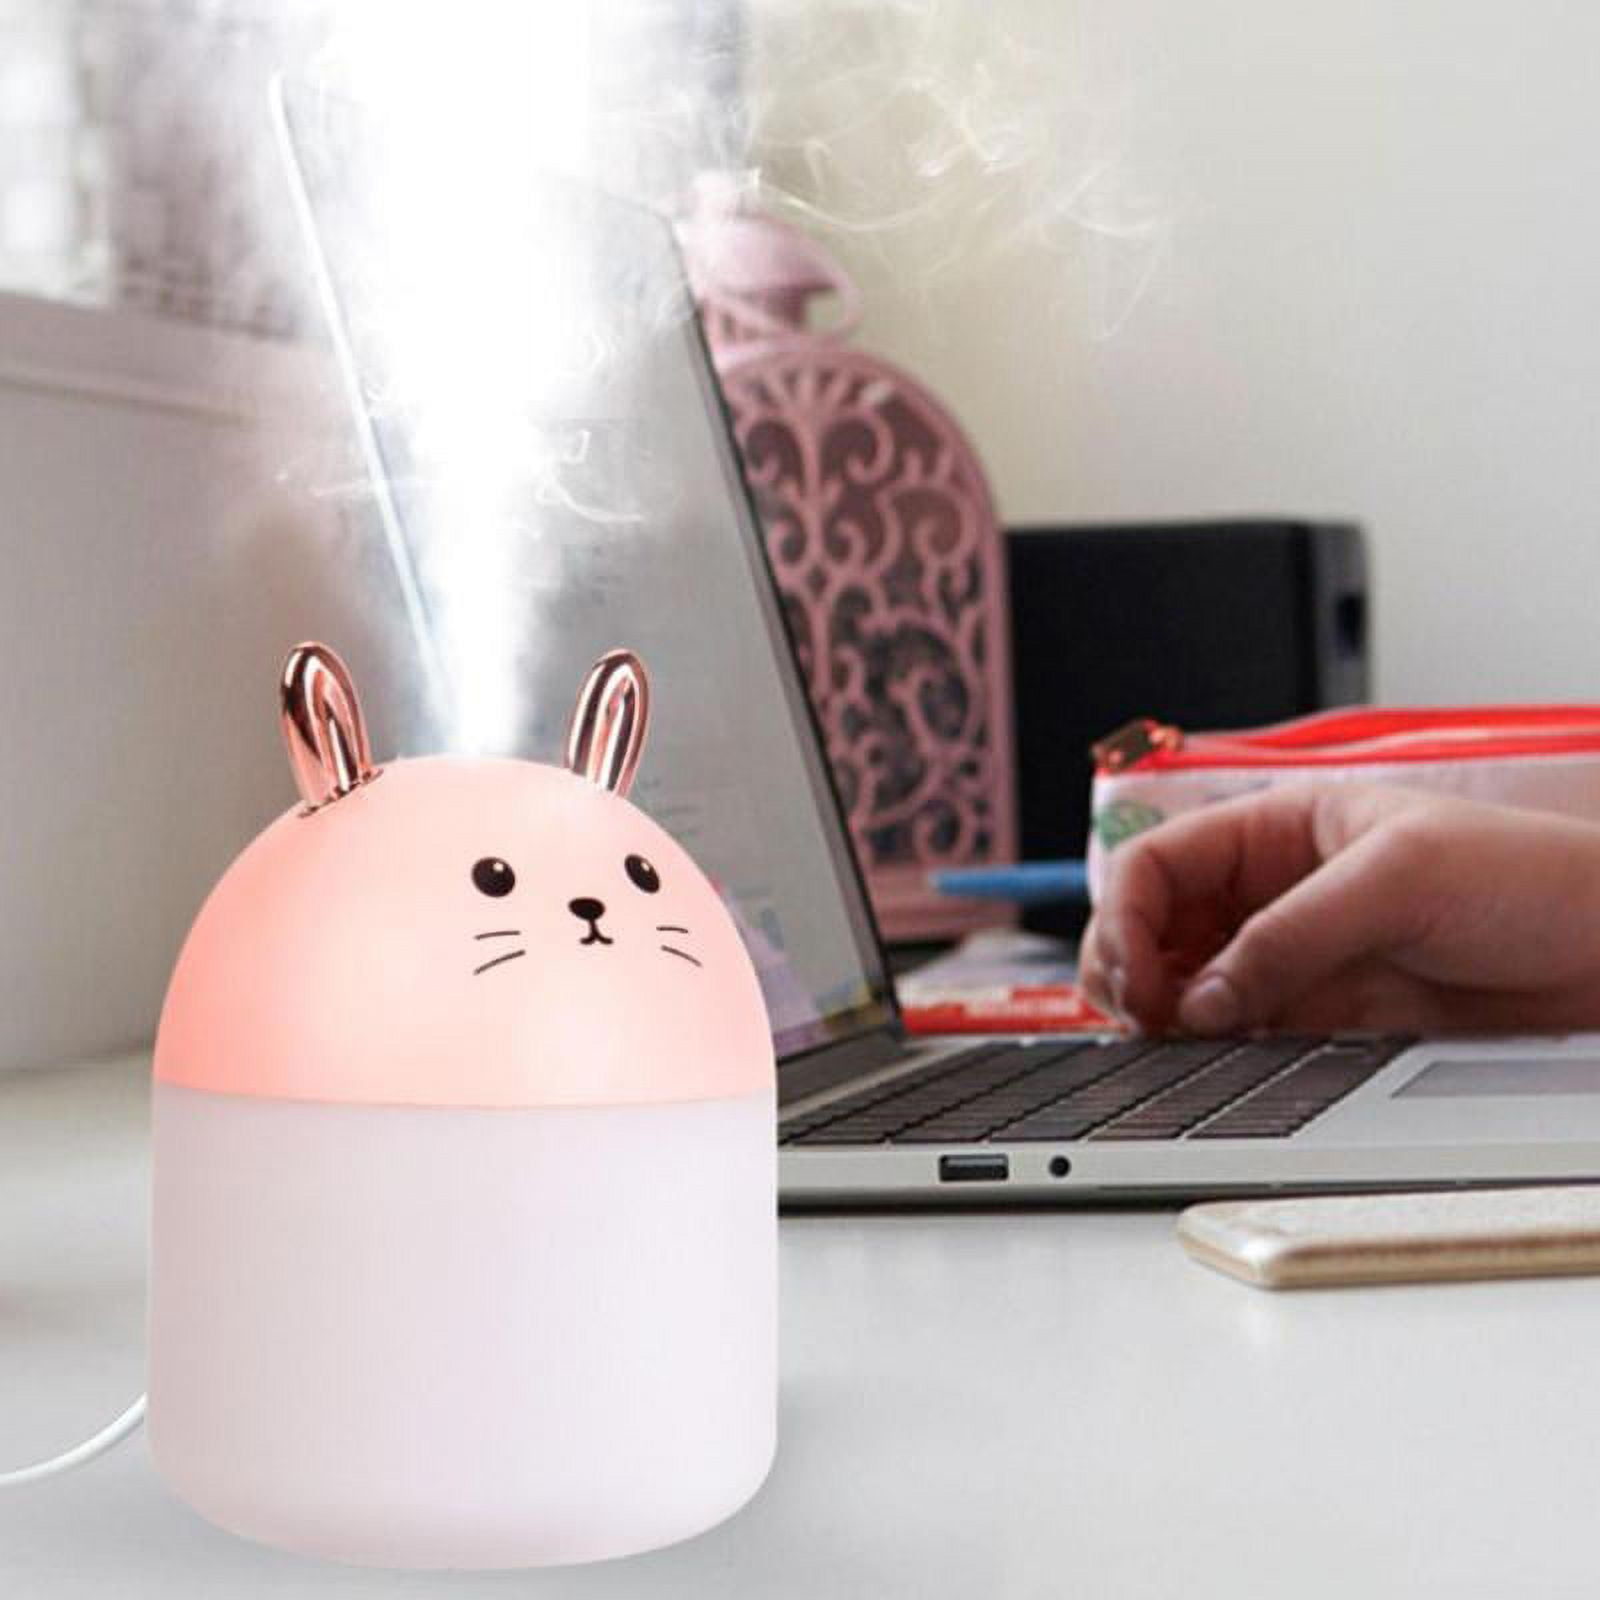 Portable 1000ML Humidifier Makes Room Hot With Lights And USB Mist Sprayer  For Home Q230901 From Look_at_mee, $7.04